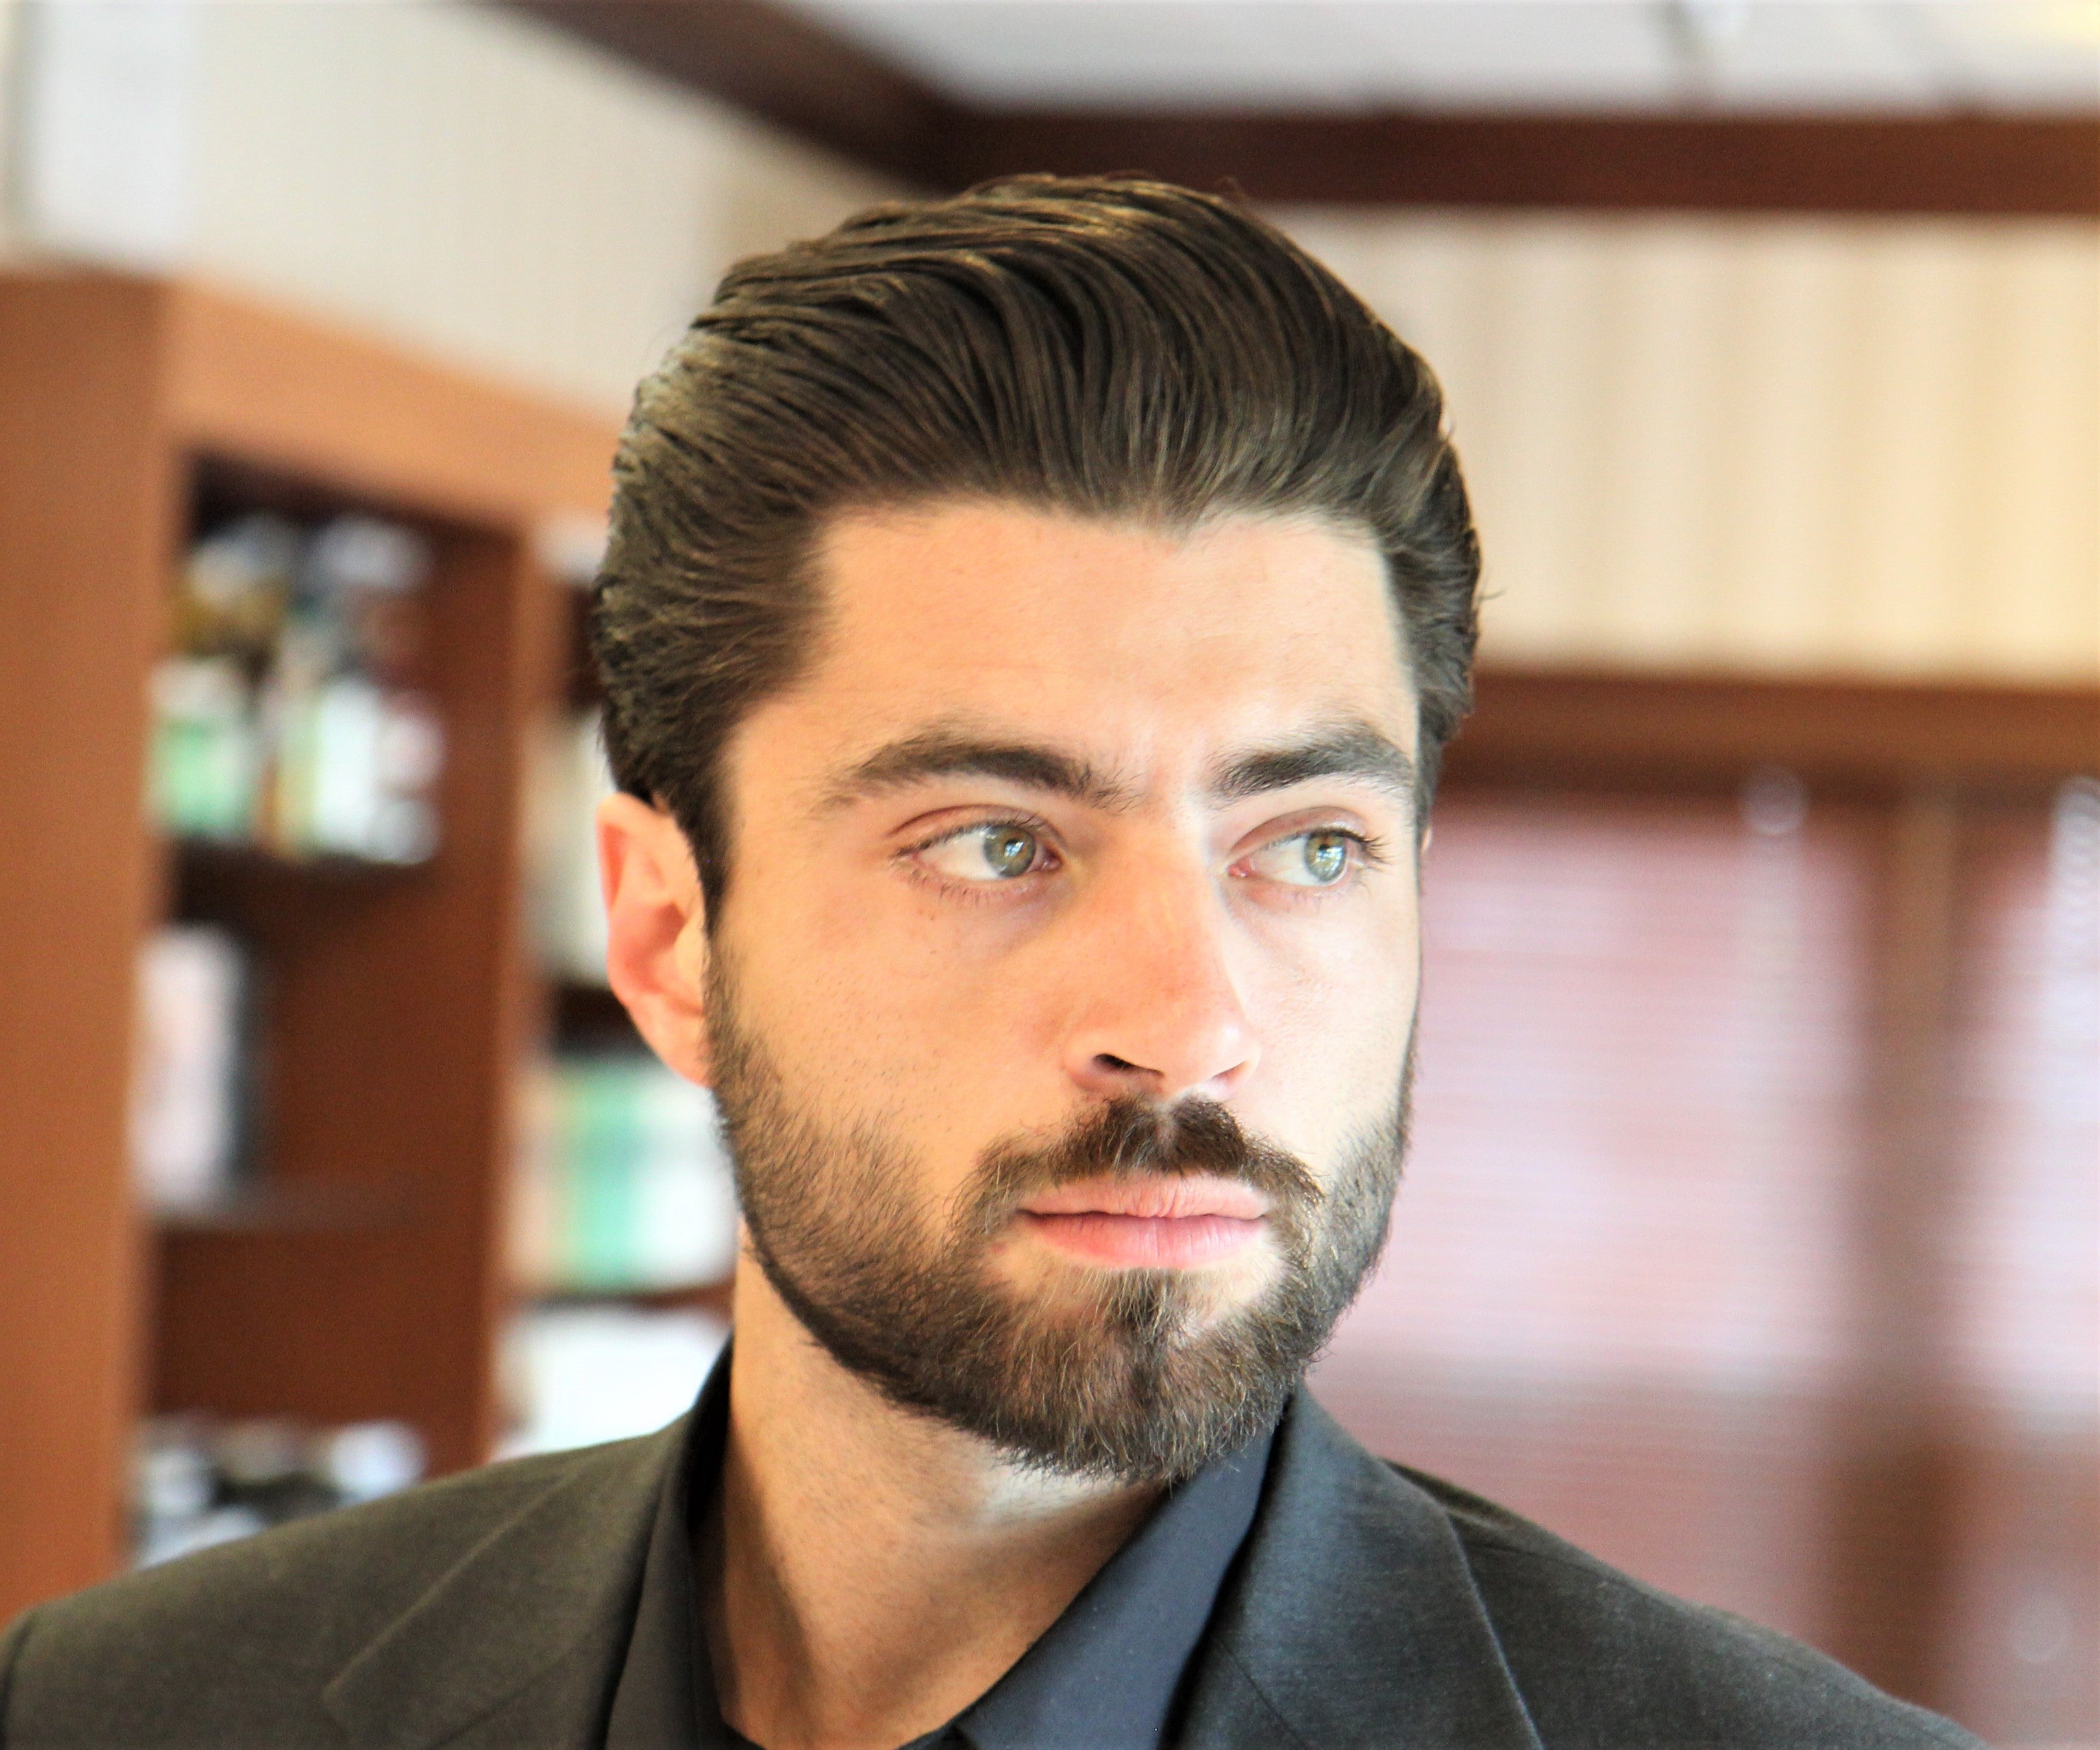 How To Style the Sleek and Edgy Slicked Back Men's Hairstyle